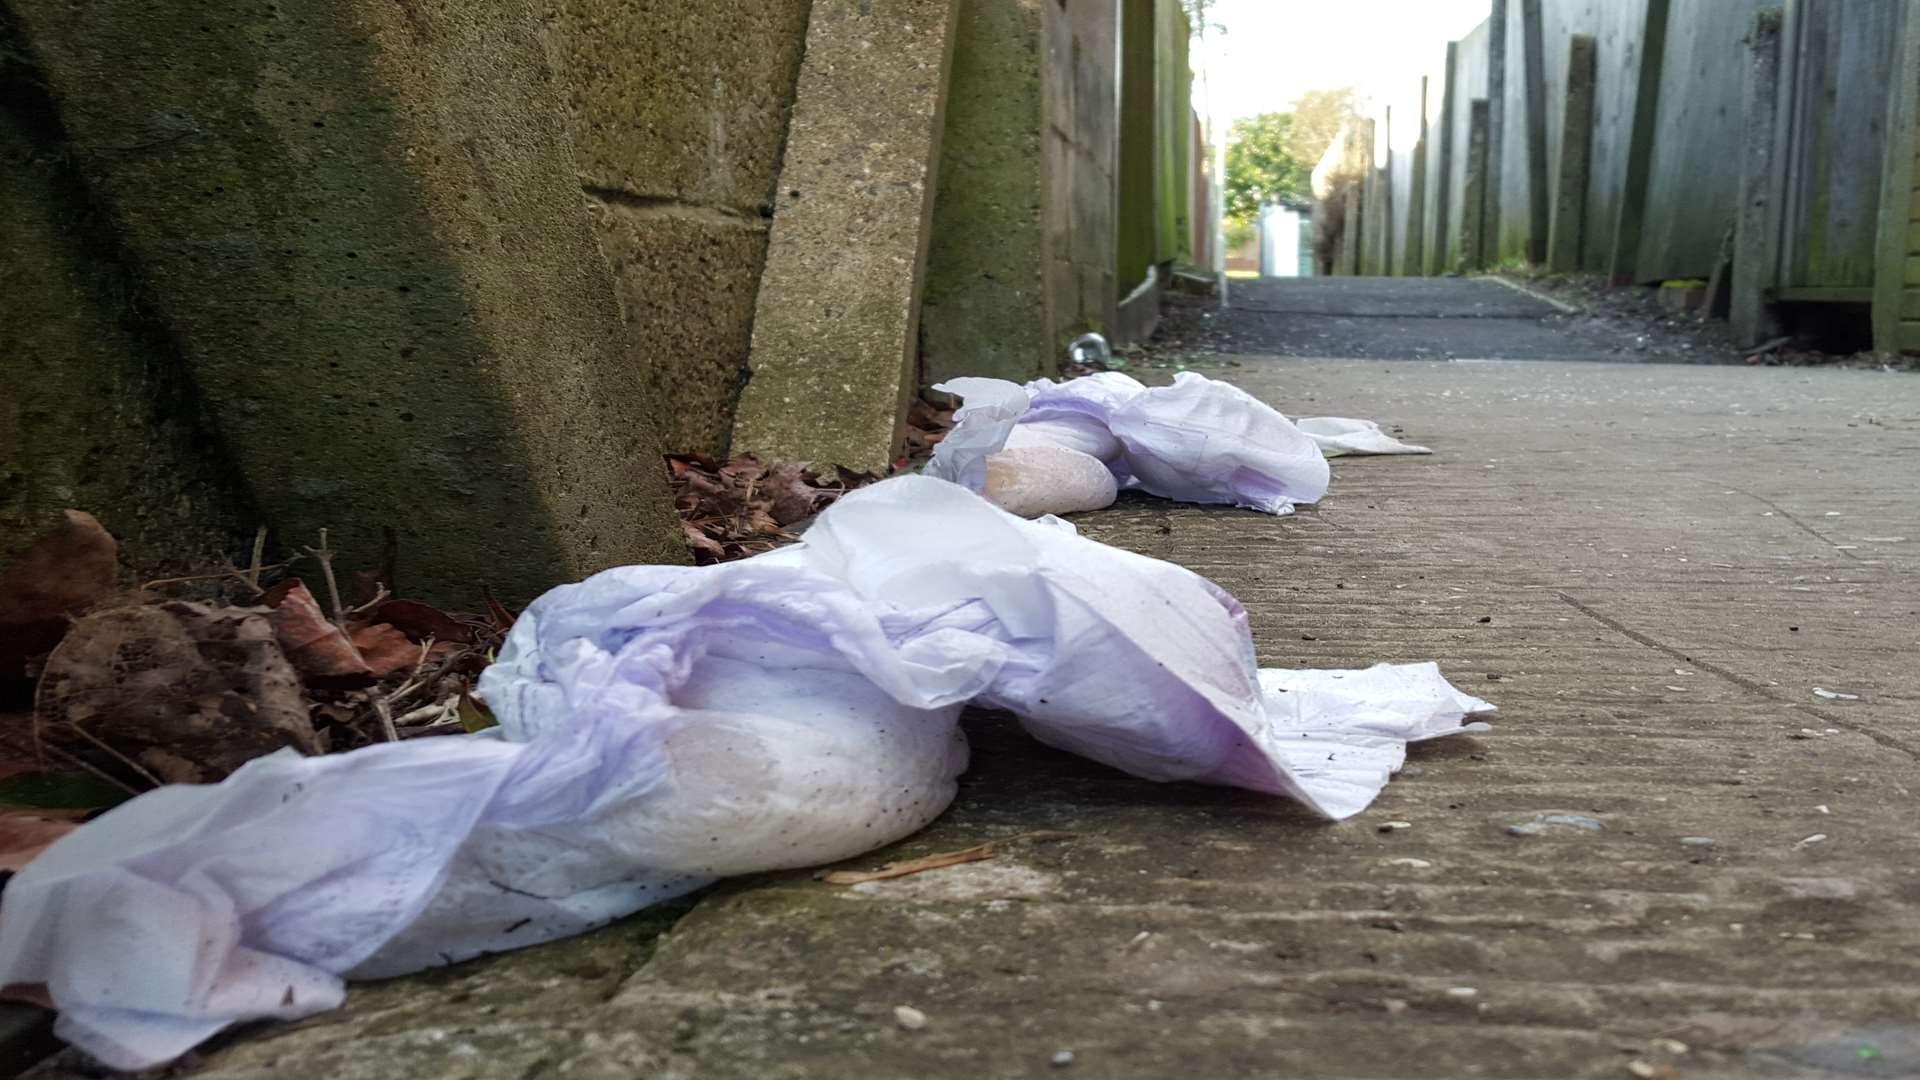 The nappies dumped in an alley way between Oak Tree Road and Harper Road